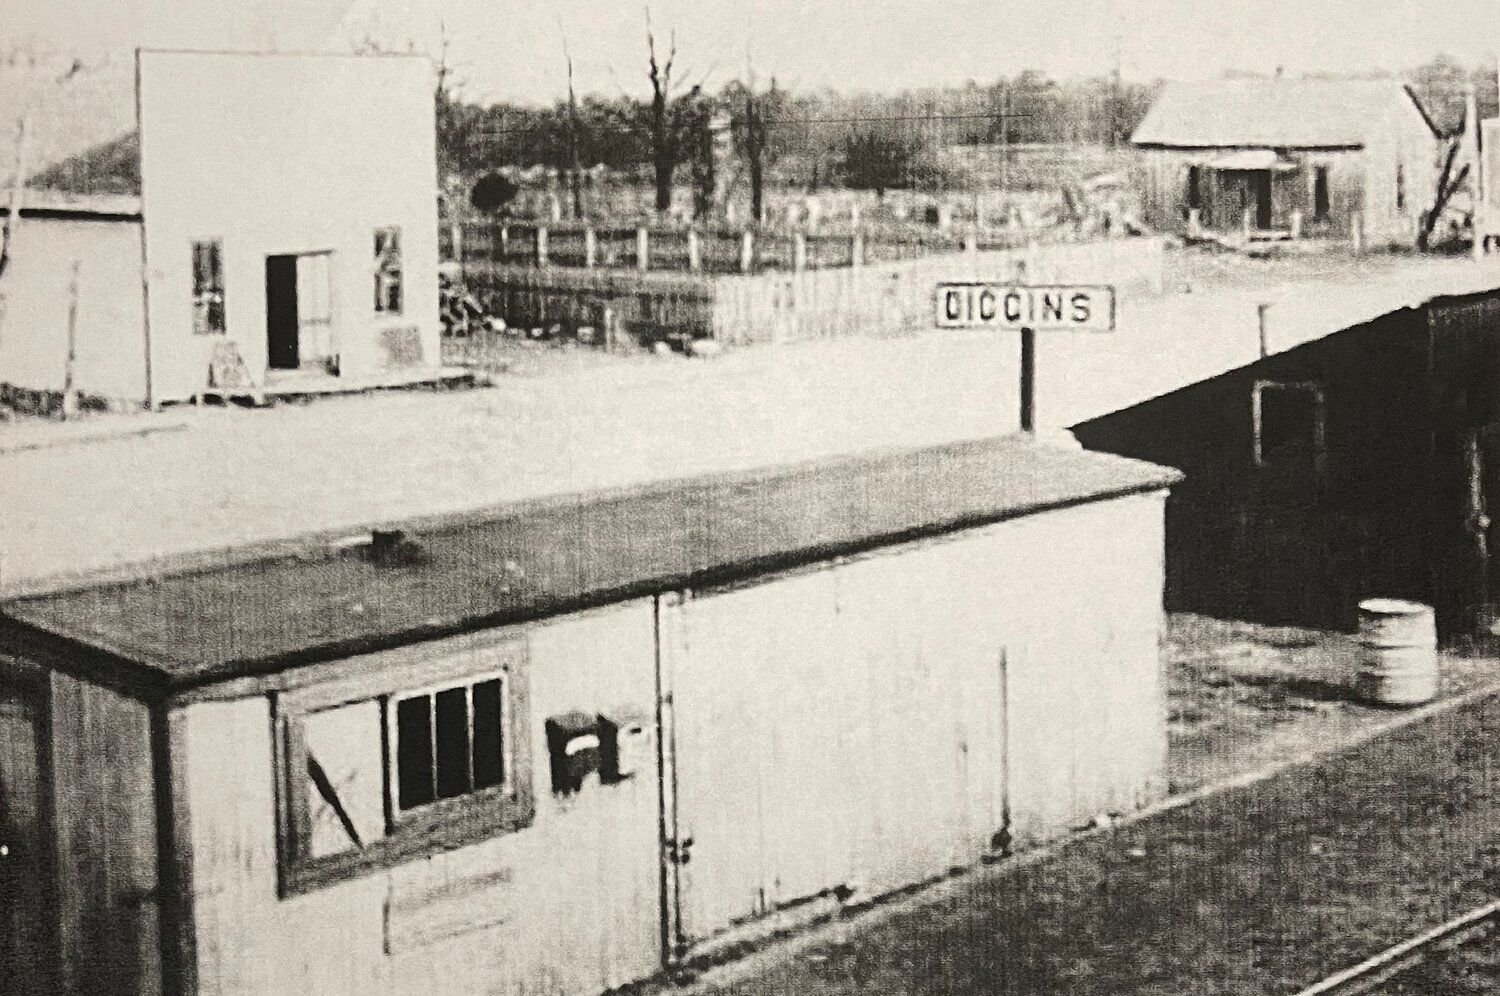 Diggins was founded in 1887, and named after a Mr. Diggins, a beloved railroad official. The site was previously known as Cut Throat, Stella and Livingston. 


Mail file photo